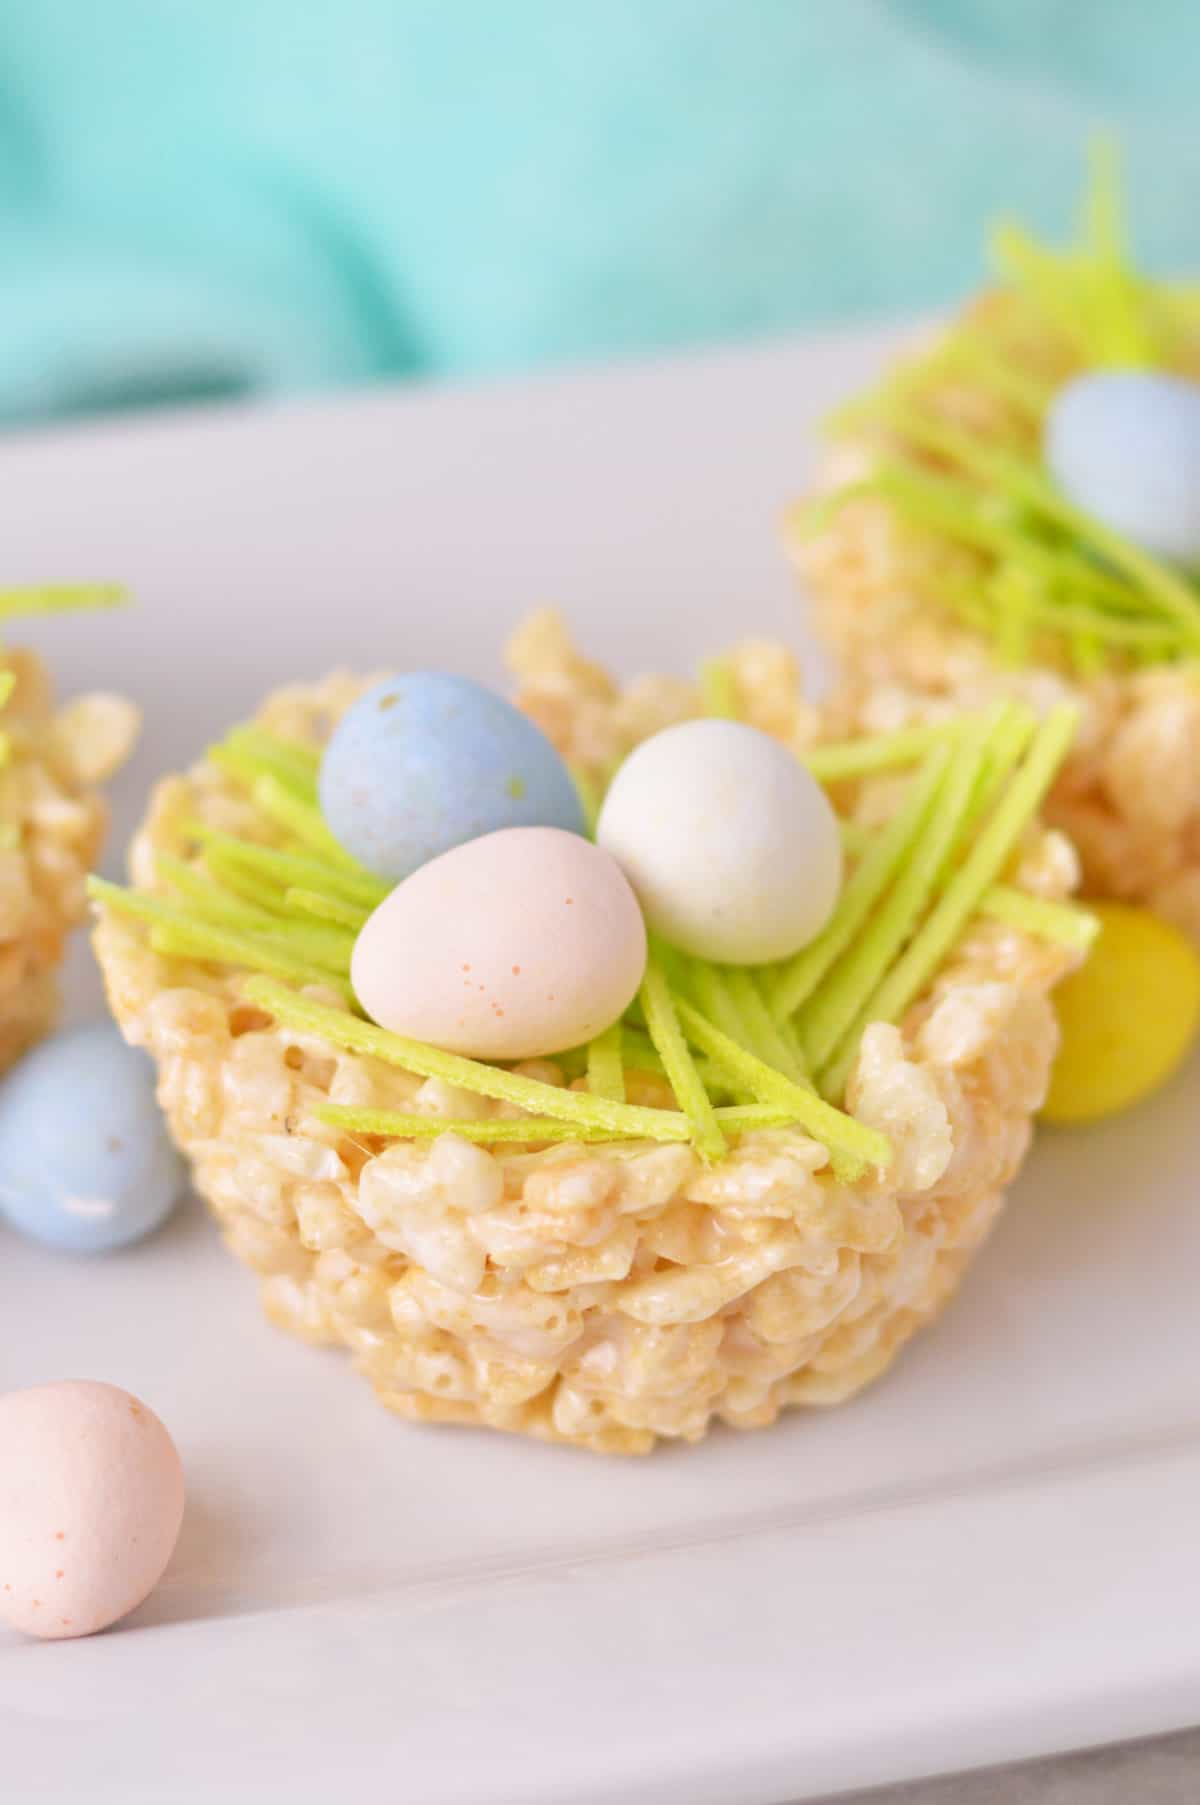 Rice Krispie Nests made with rice krispy treats formed into nests shapes and filled with edible green grass and chocolate mini eggs.